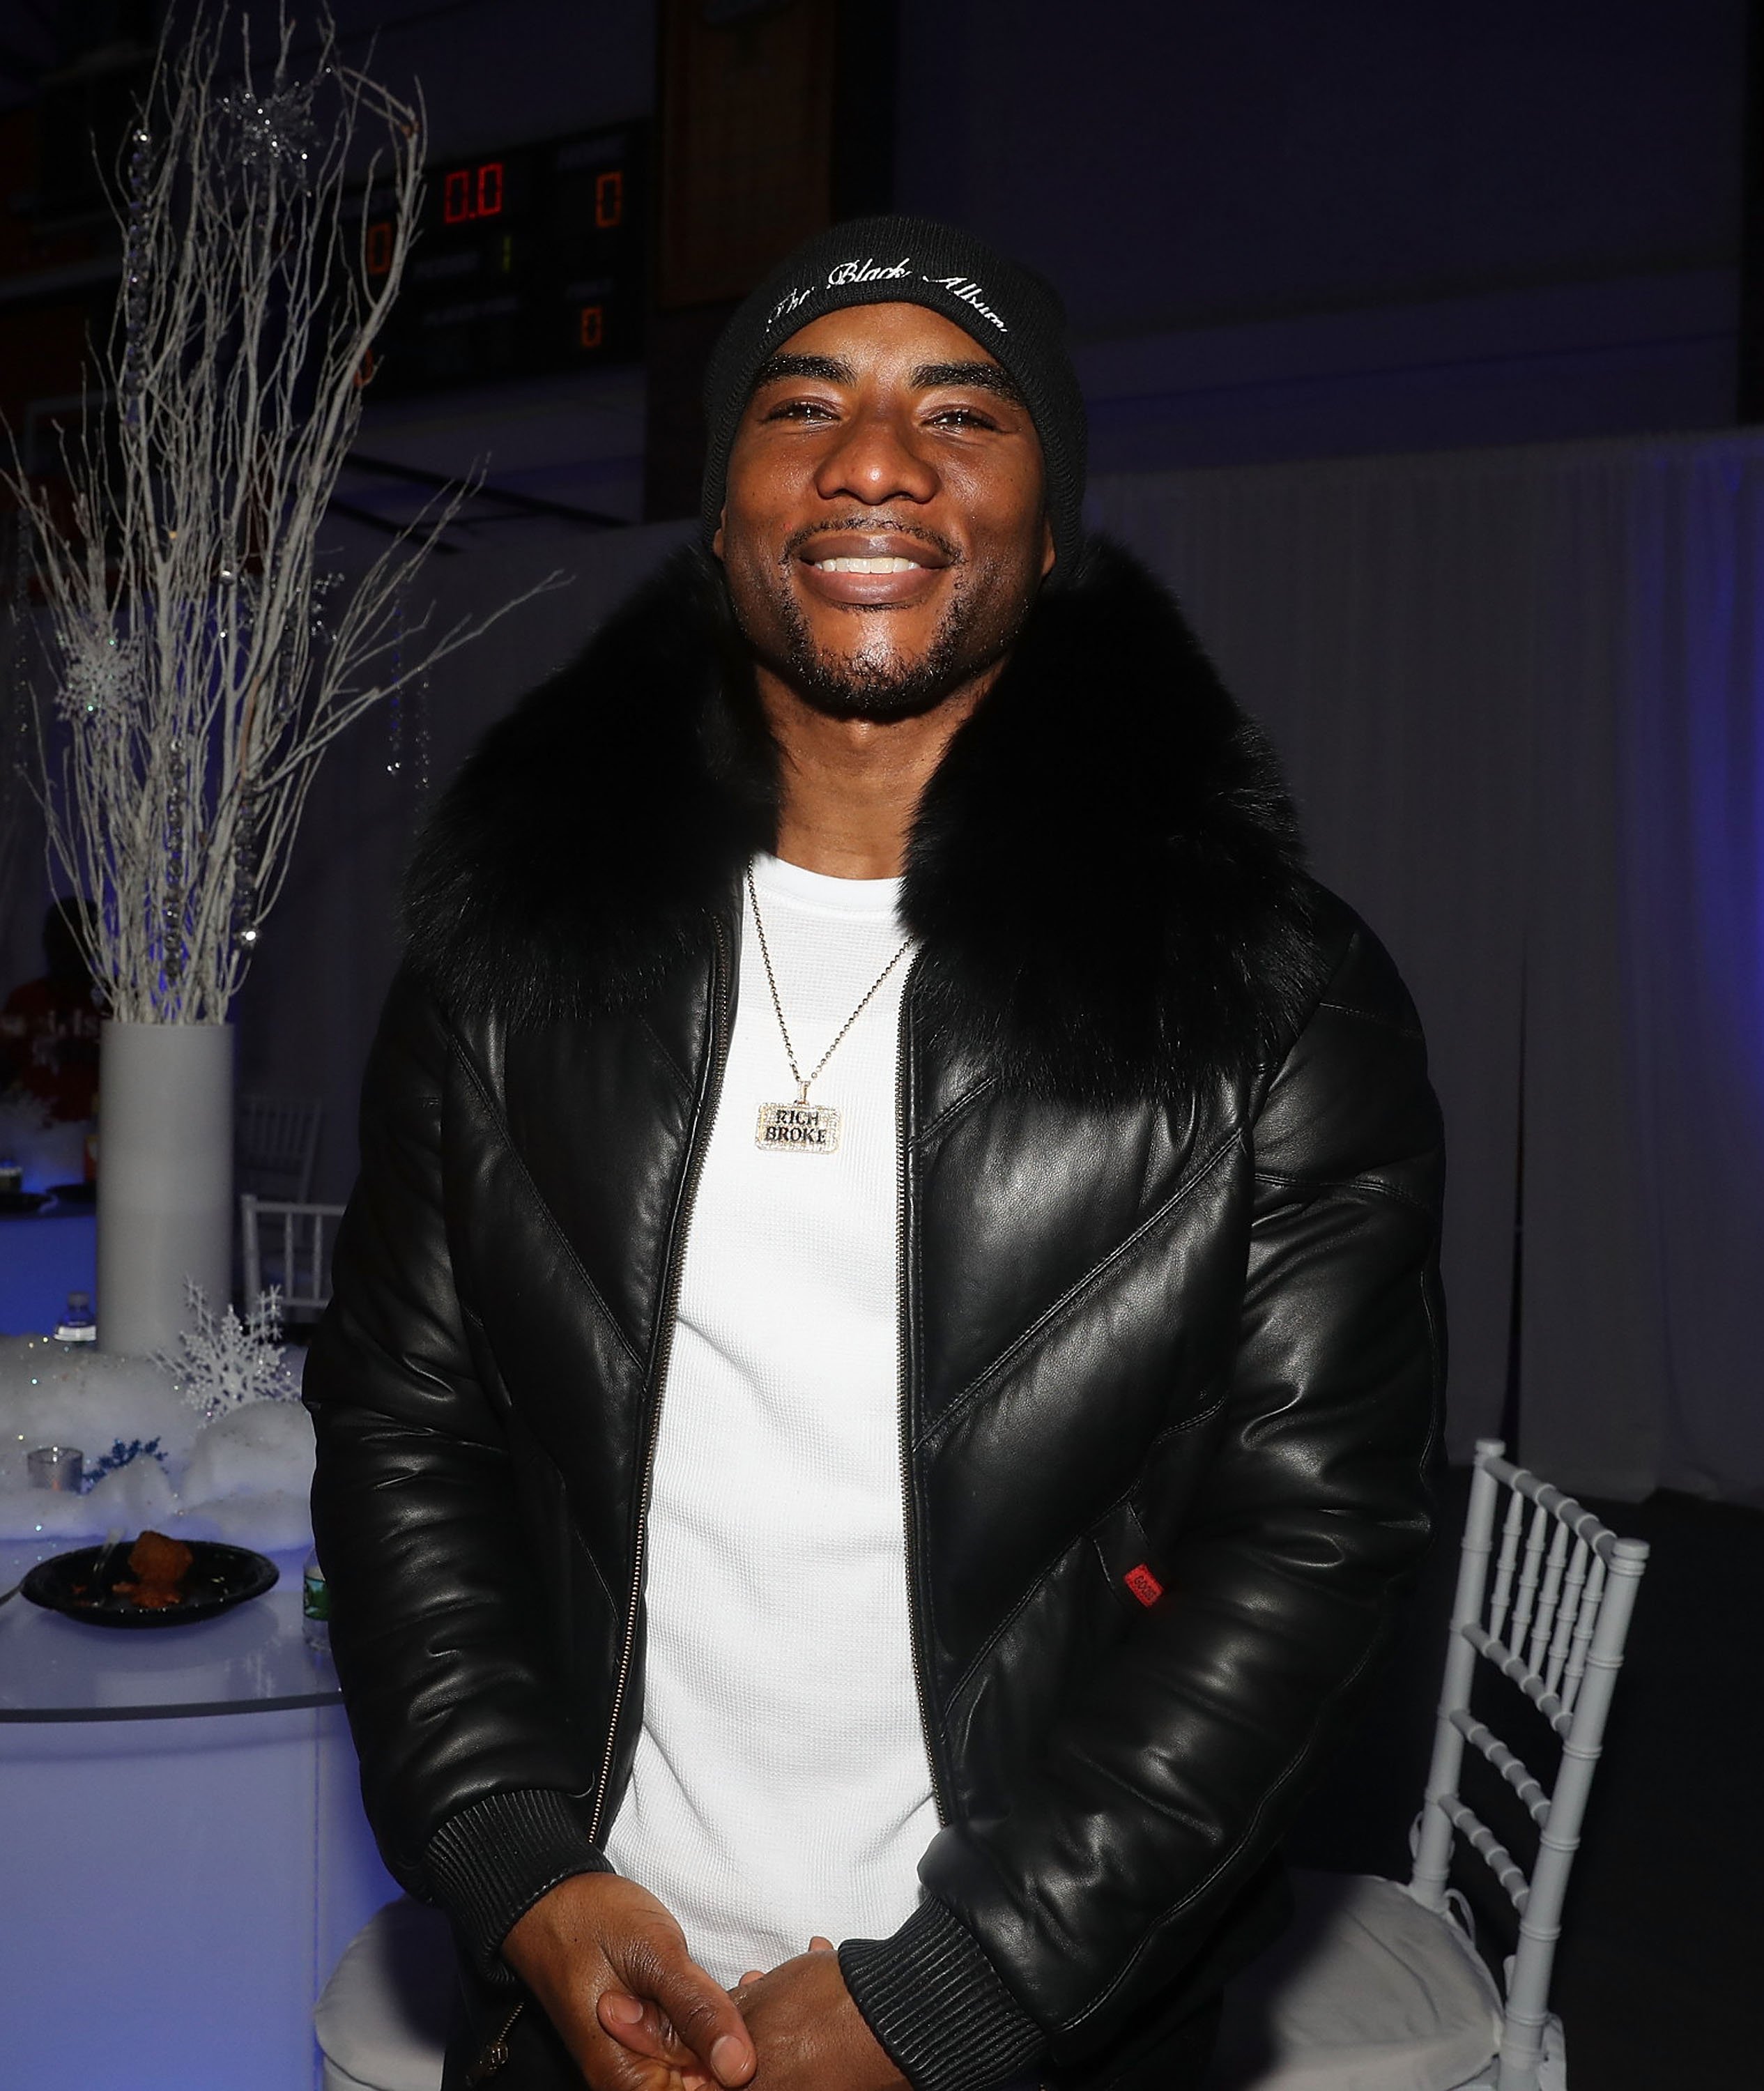 Charlamagne tha God attends 3rd Annual Winter Wonderland Holiday Charity Event Hosted By La La Anthony at Gauchos Gym on December 17, 2018 | Photo: GettyImages